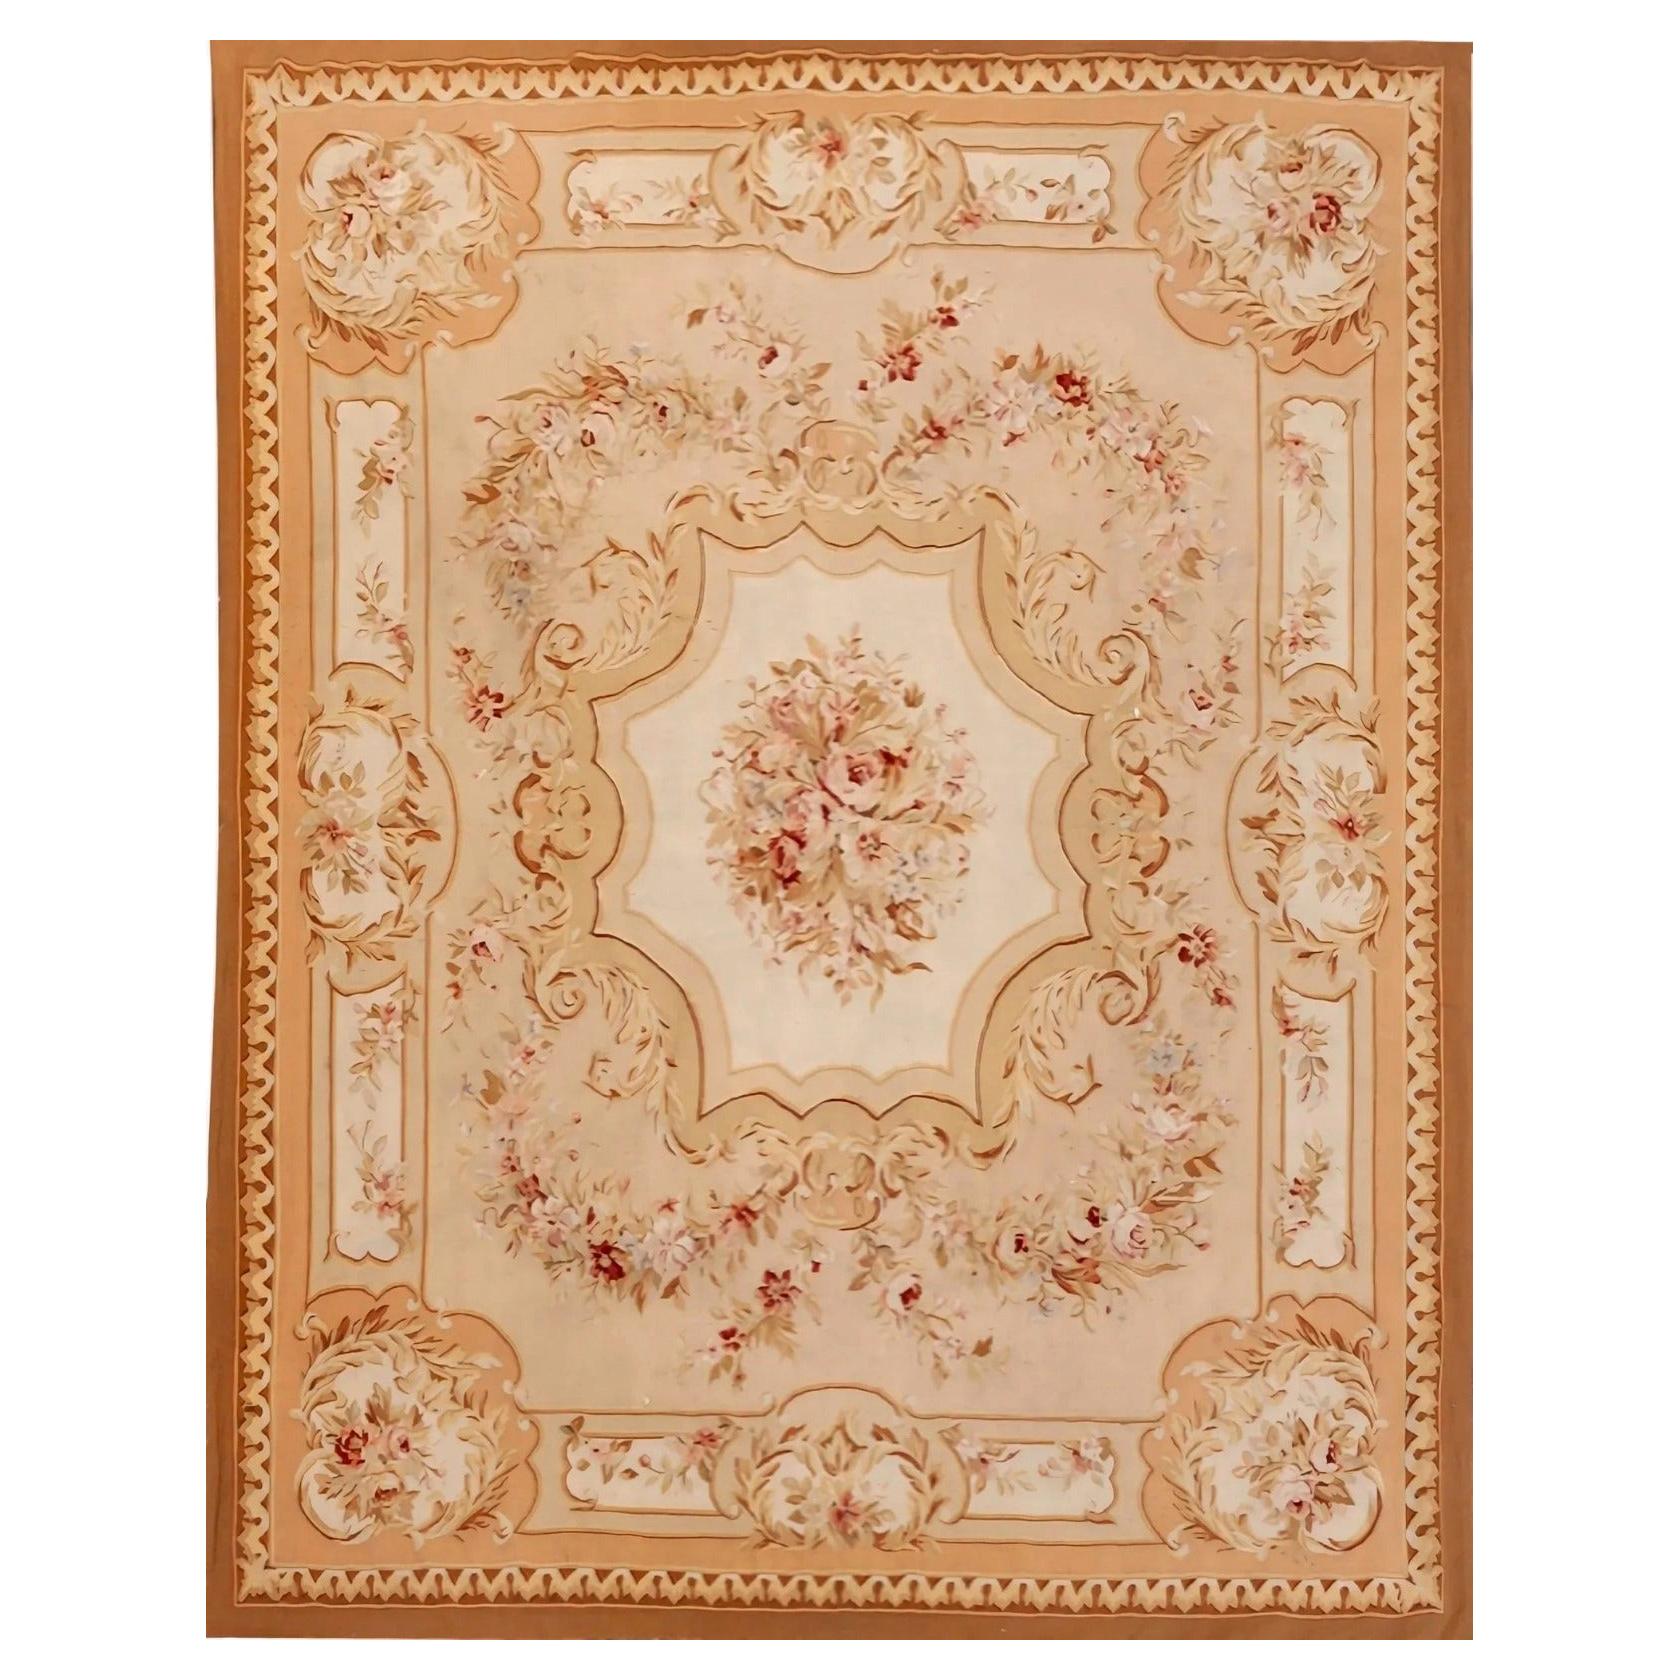 French Carpet Aubusson Style, 20th Century